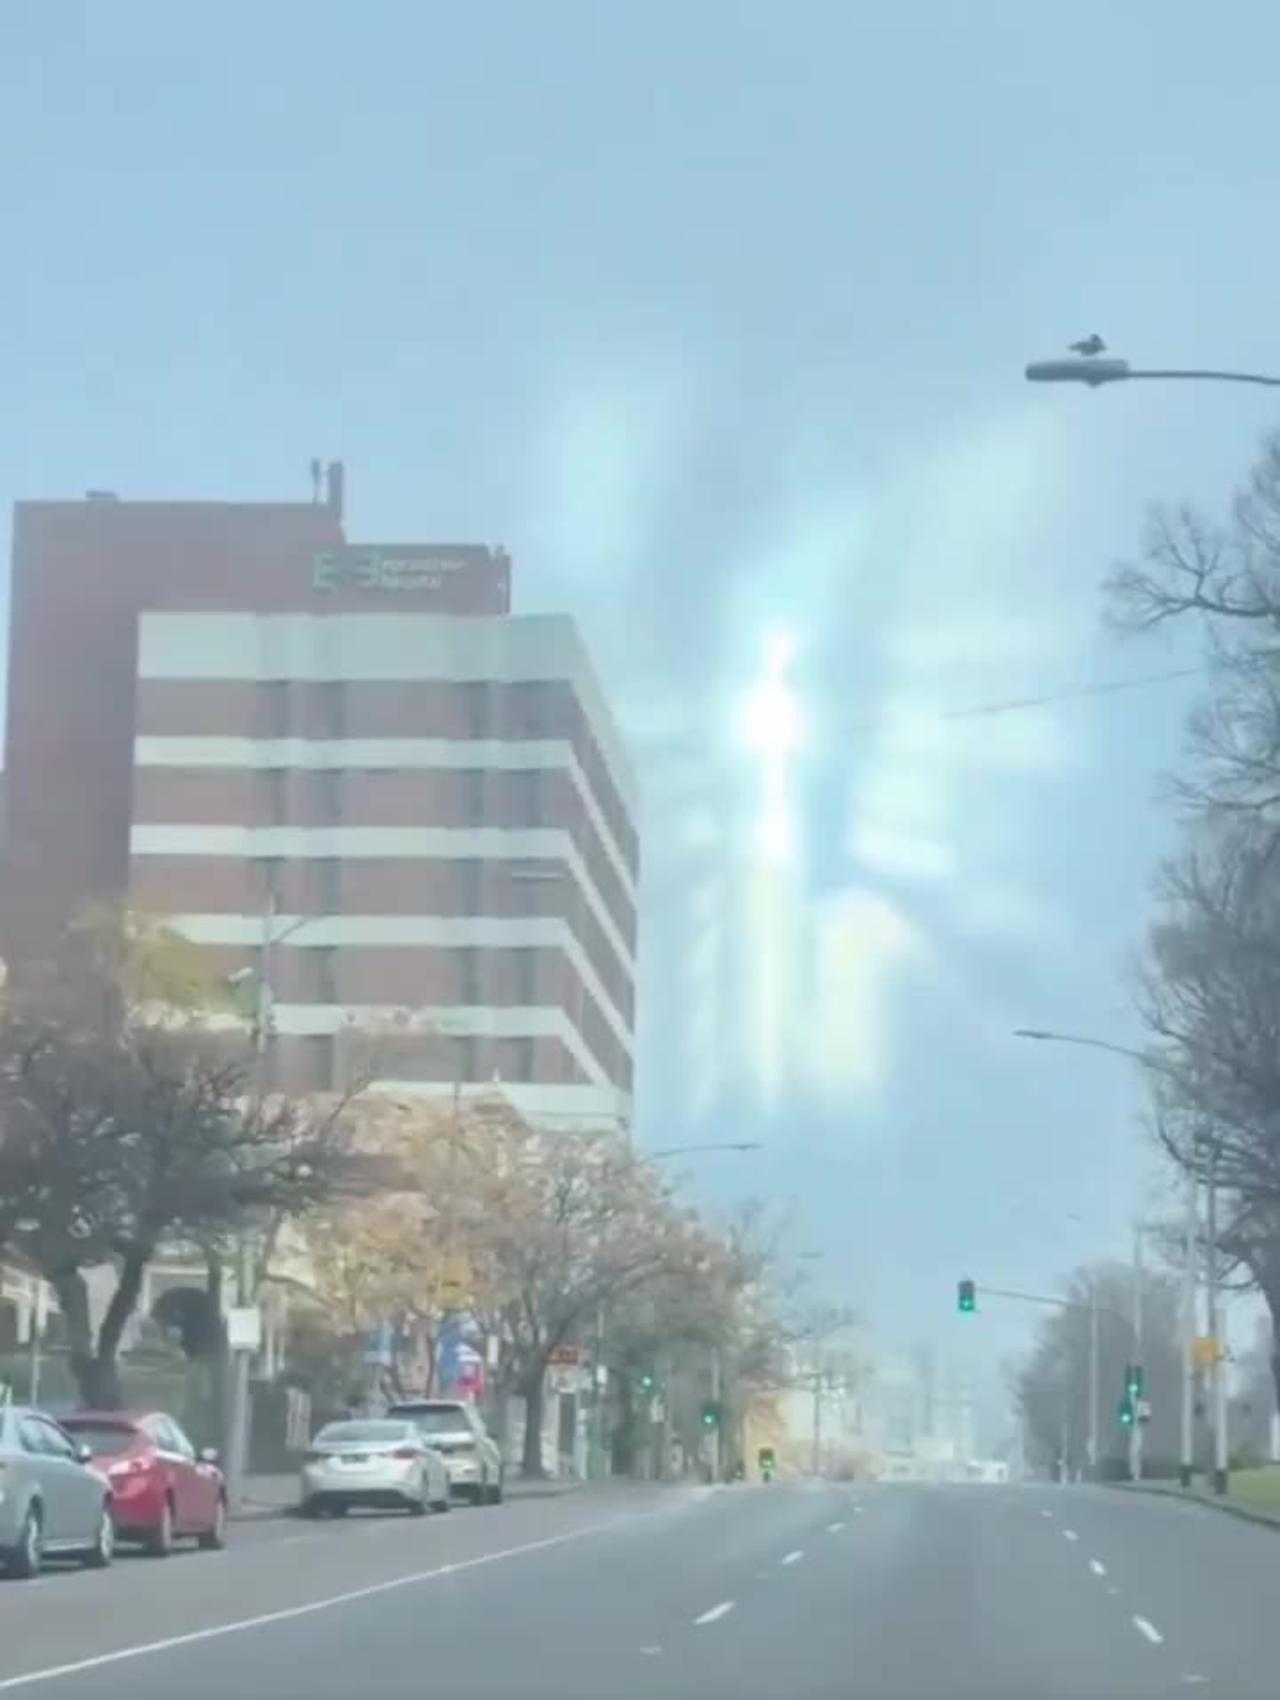 HOLOGRAM [Blue Beam Alert] An unusual phenomenon was observed in the sky